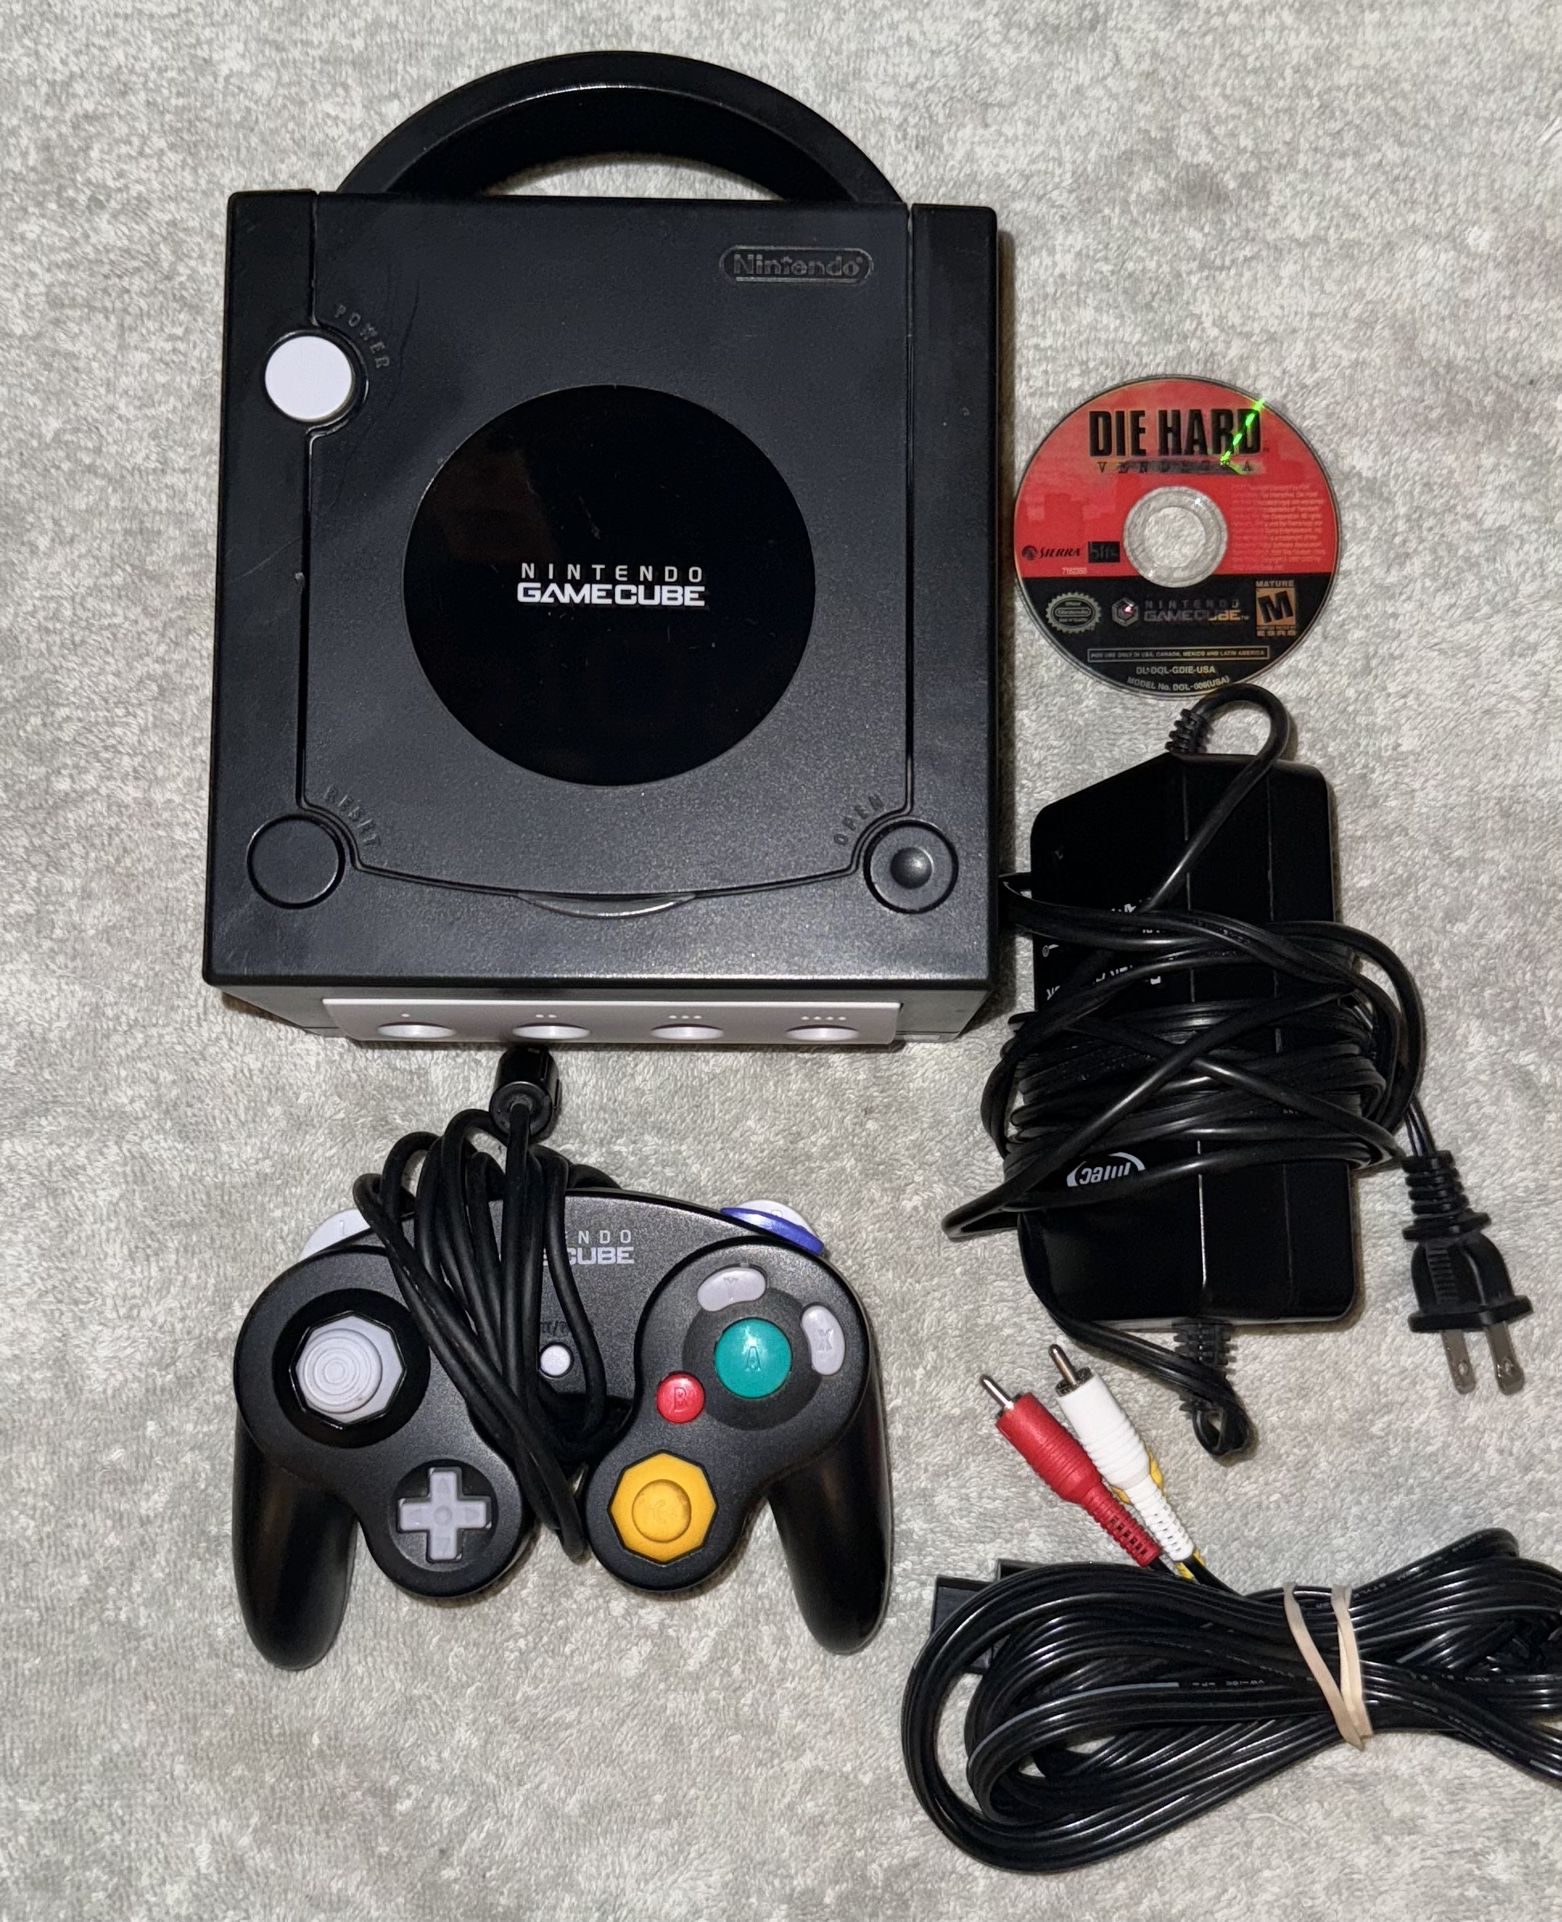 BLACK NINTENDO GAMECUBE CONSOLE WITH VIDEO GAME & CONTROLLER